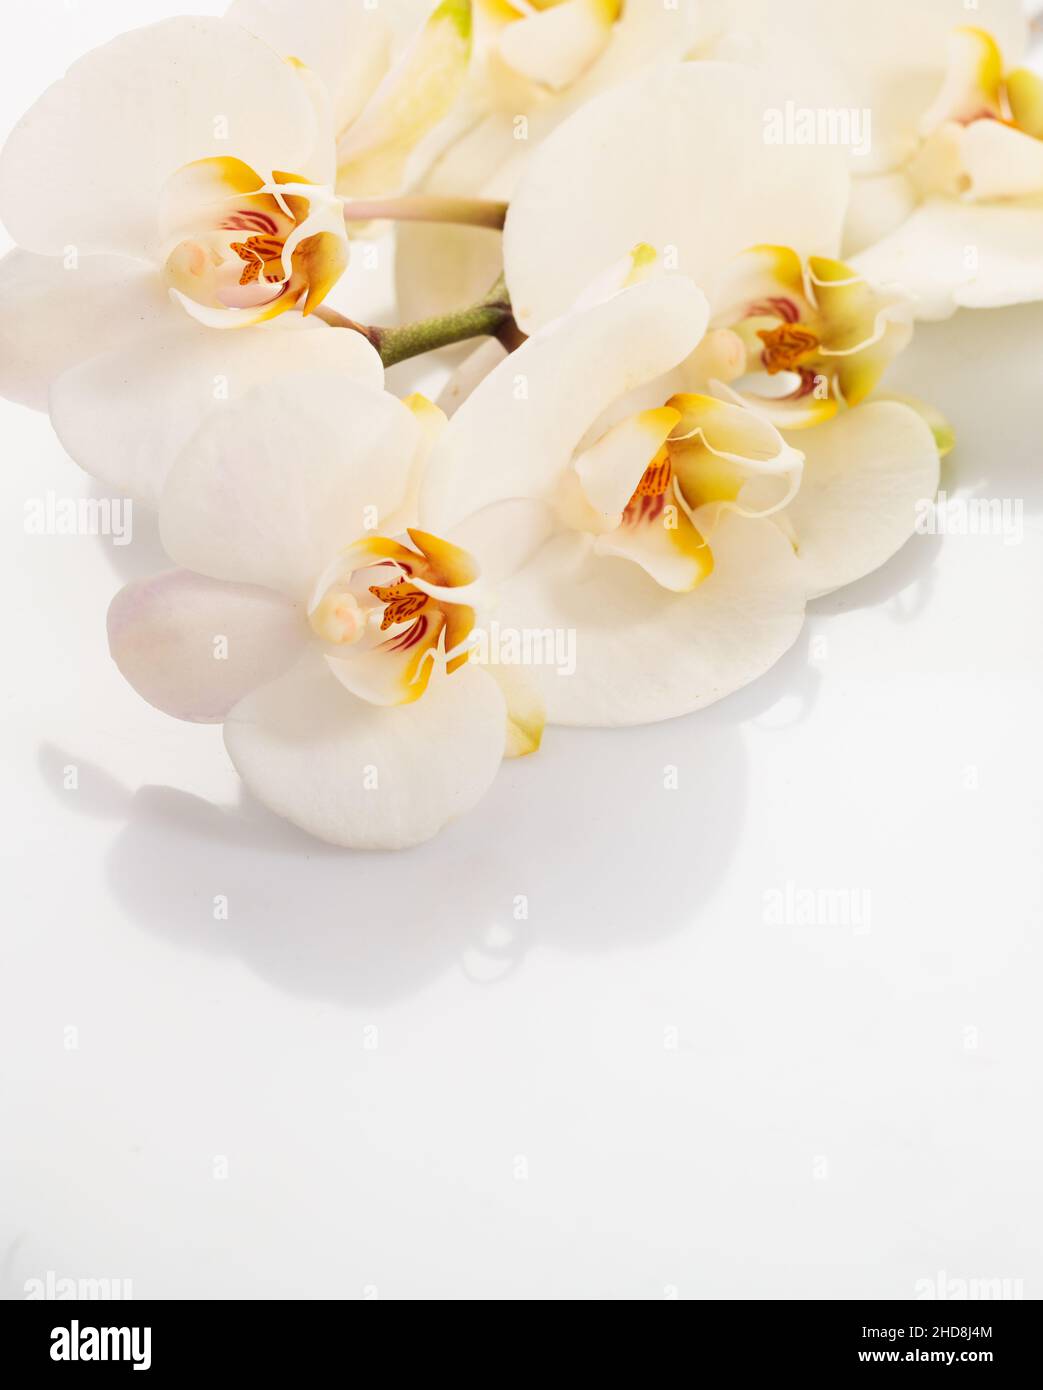 Phalaenopsis orchid moth dendrobium orchidea on white background. White fresh elegant exotic flower for spa, aromatherapy, zen. Orhid plant for event, Stock Photo